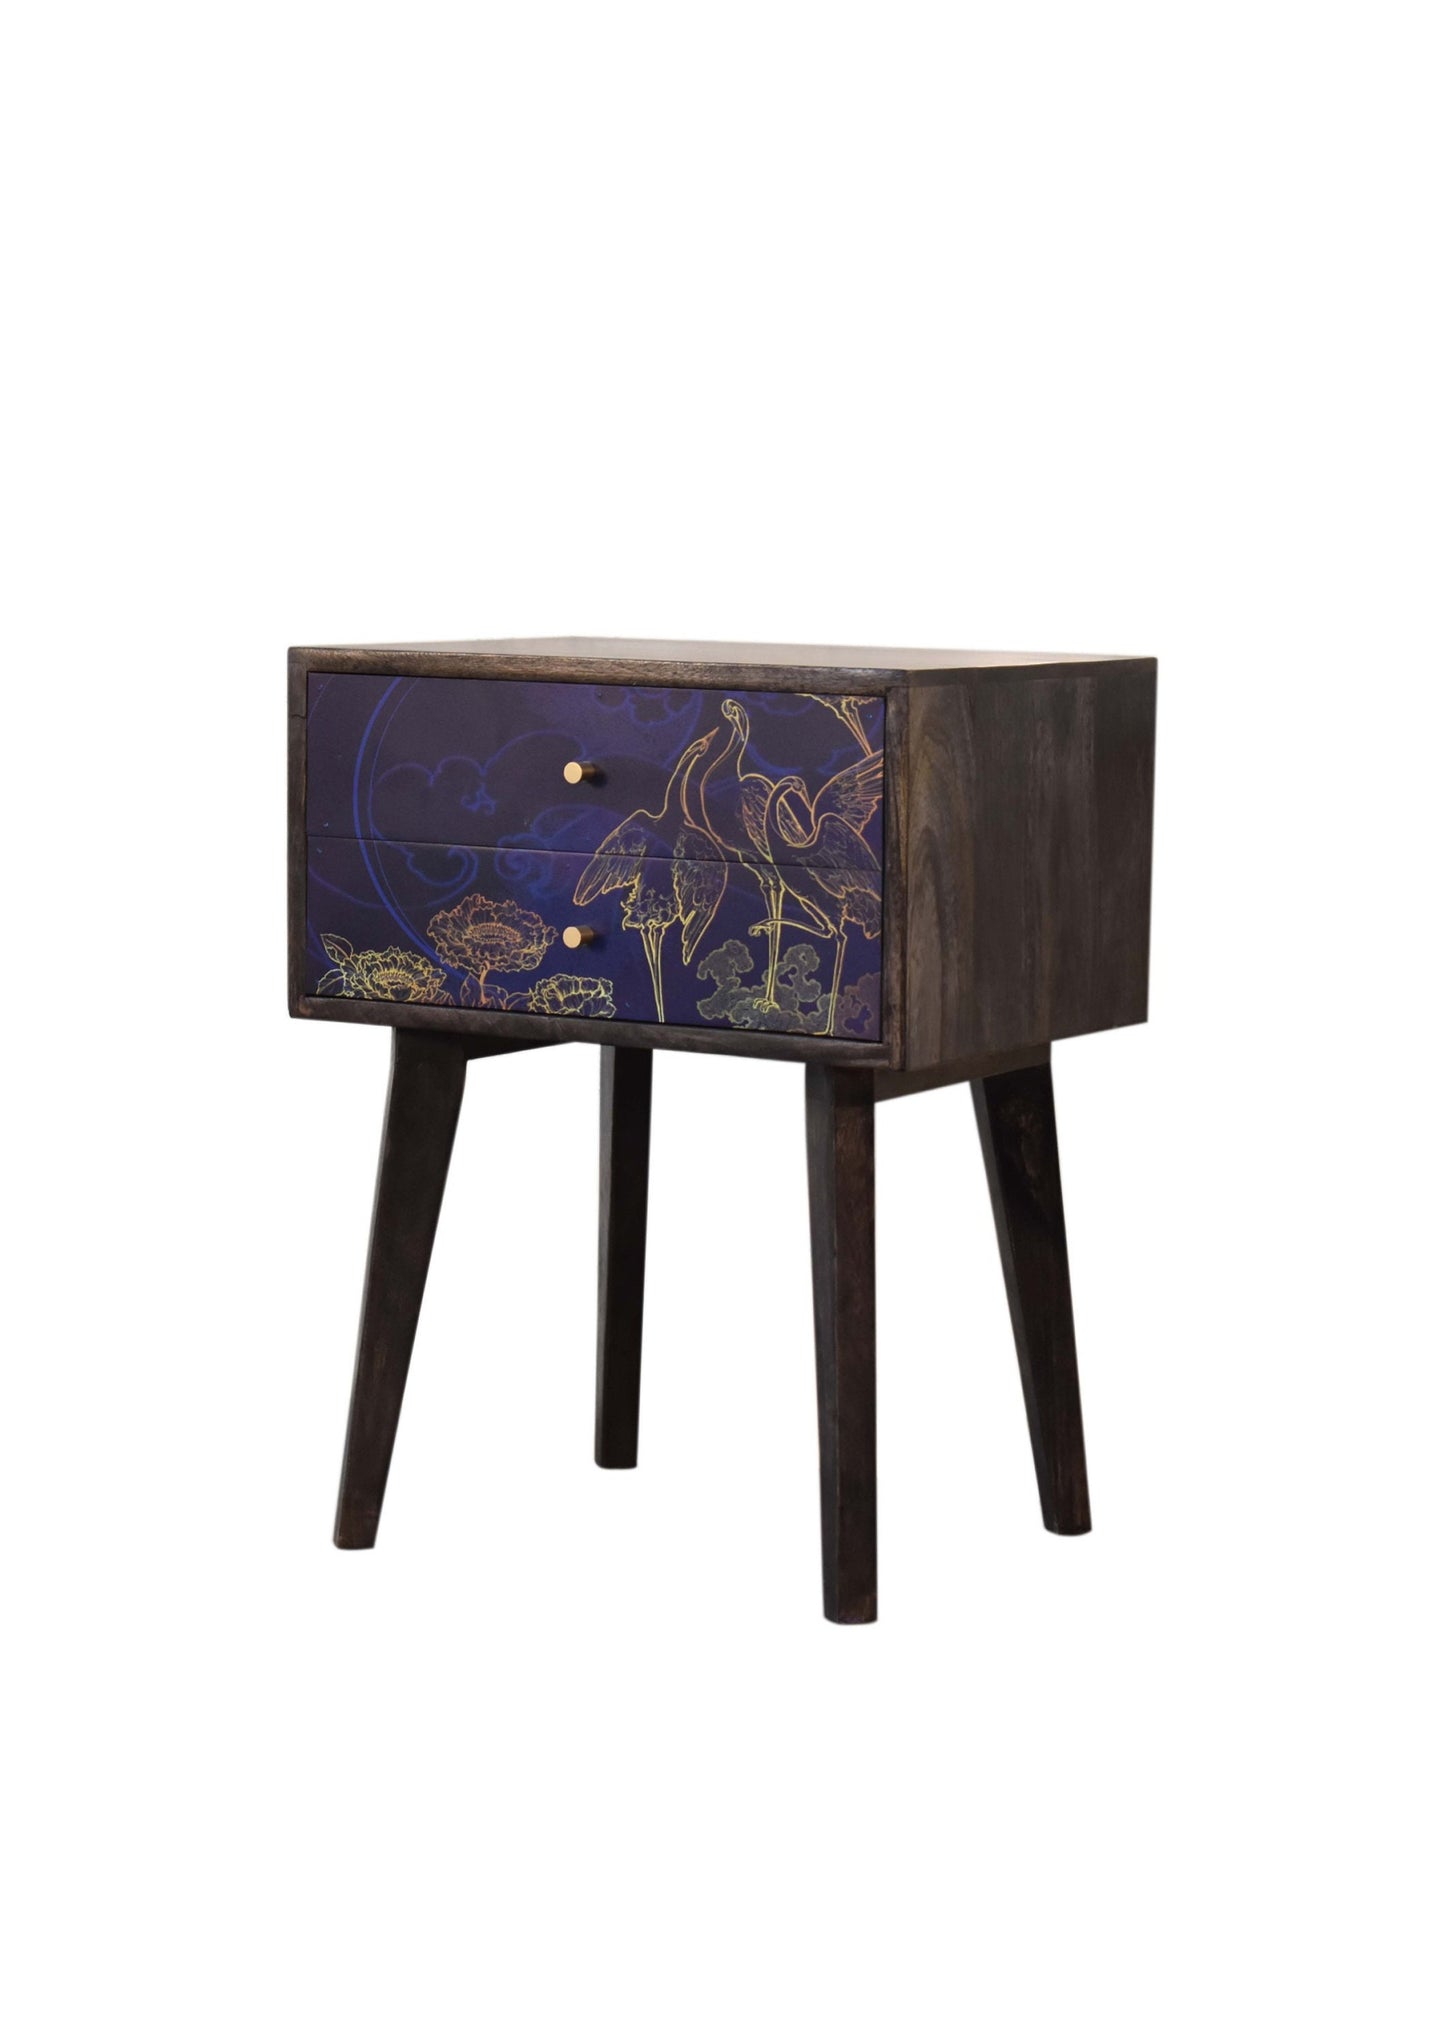 Elegant Designer Mid Century Blue Bedside Drawers with Gold Prints of Flowers and Birds